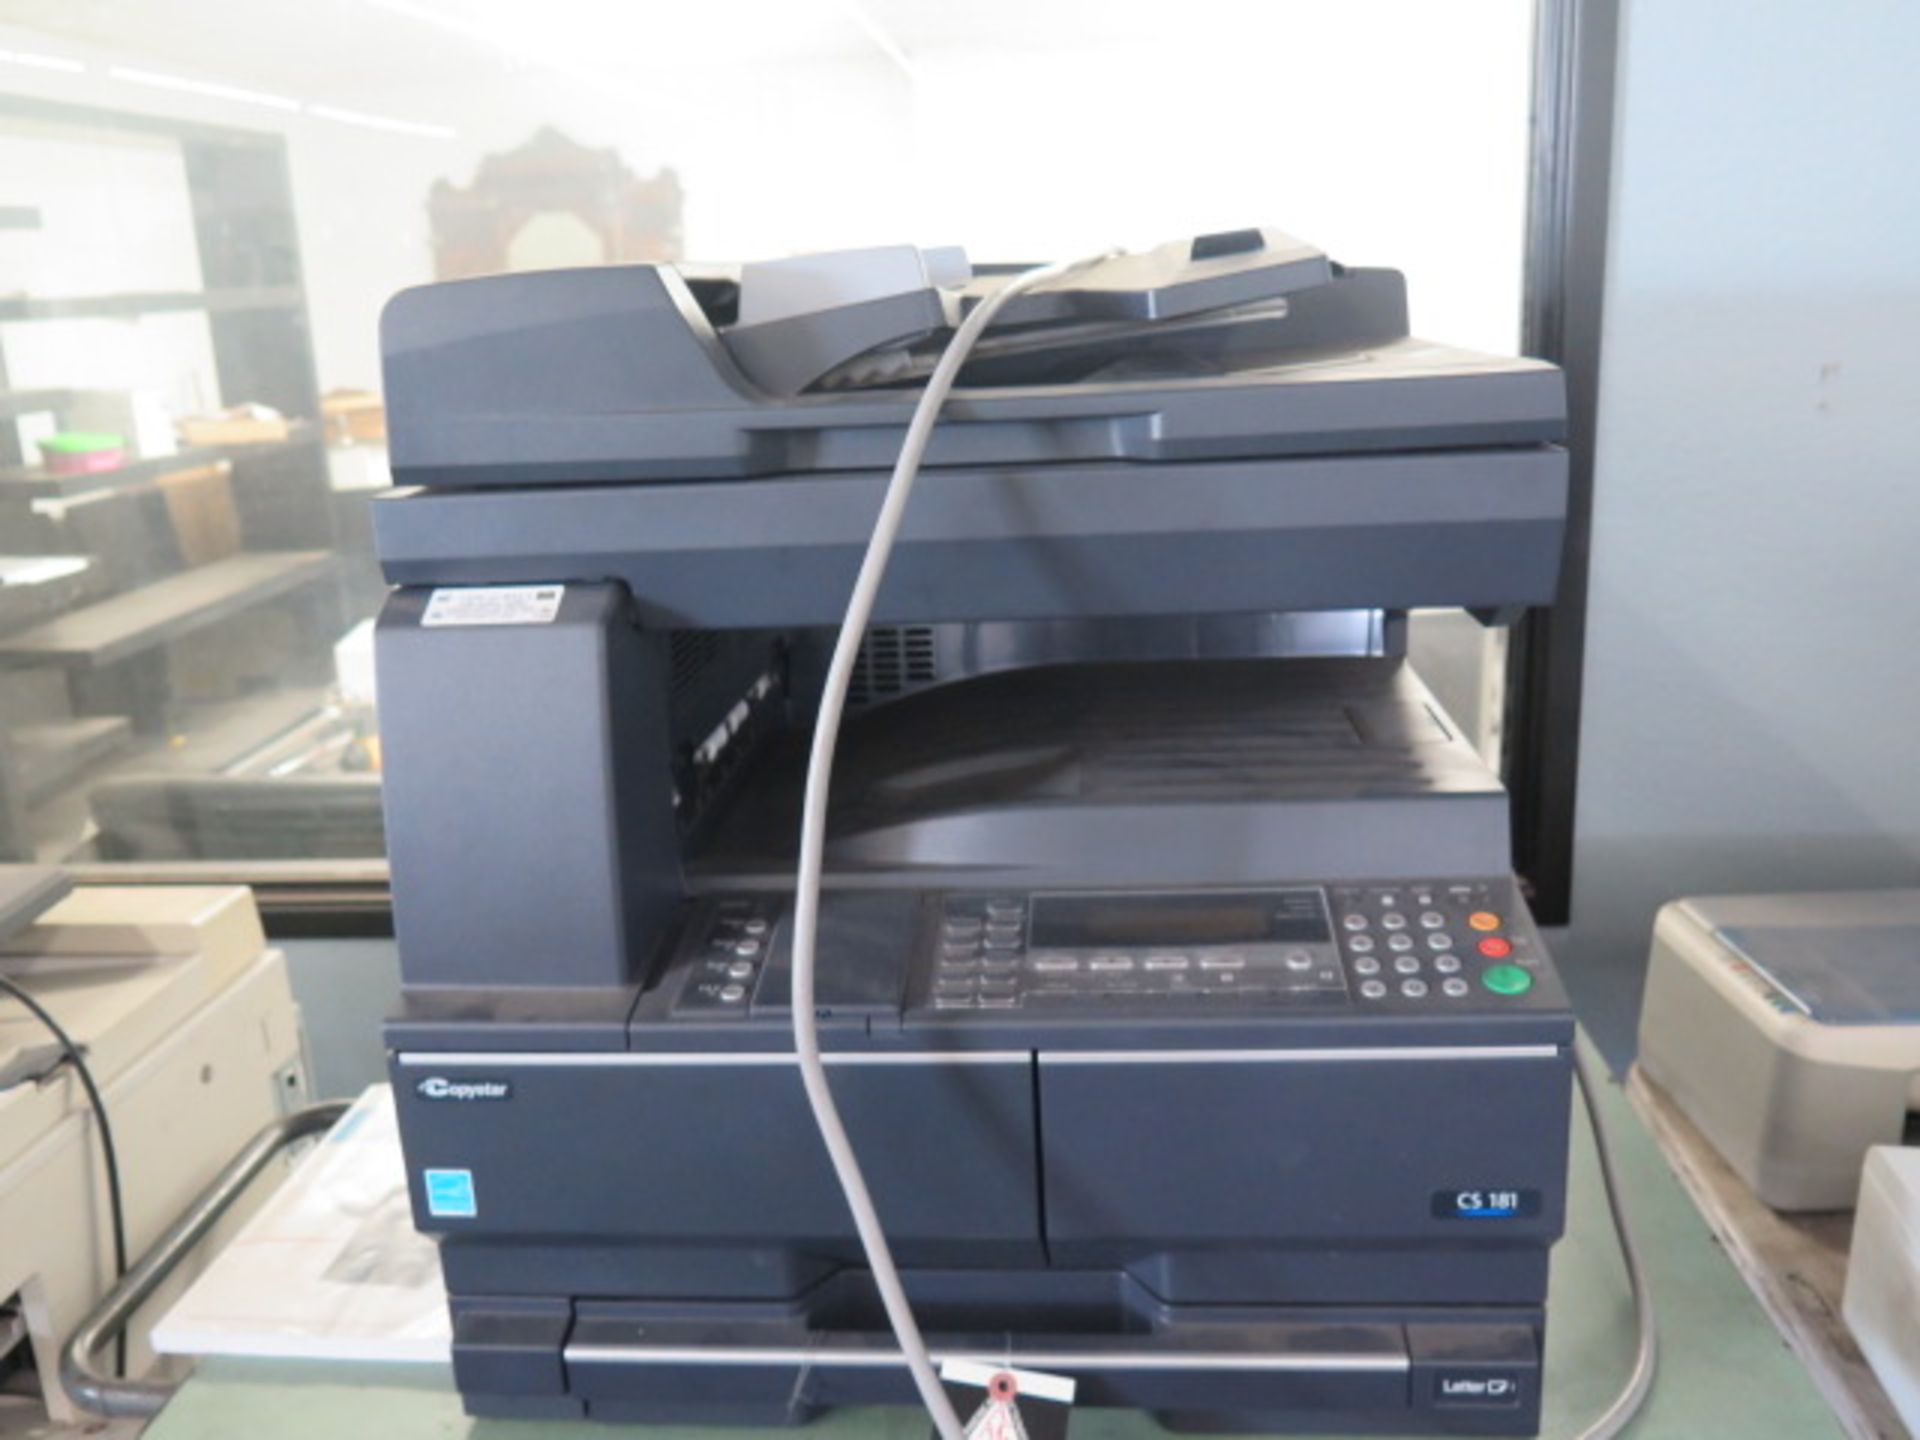 CopyStar CS181 Office Copy/Print/Scan/FAX Machine and Office Printers - Image 3 of 4